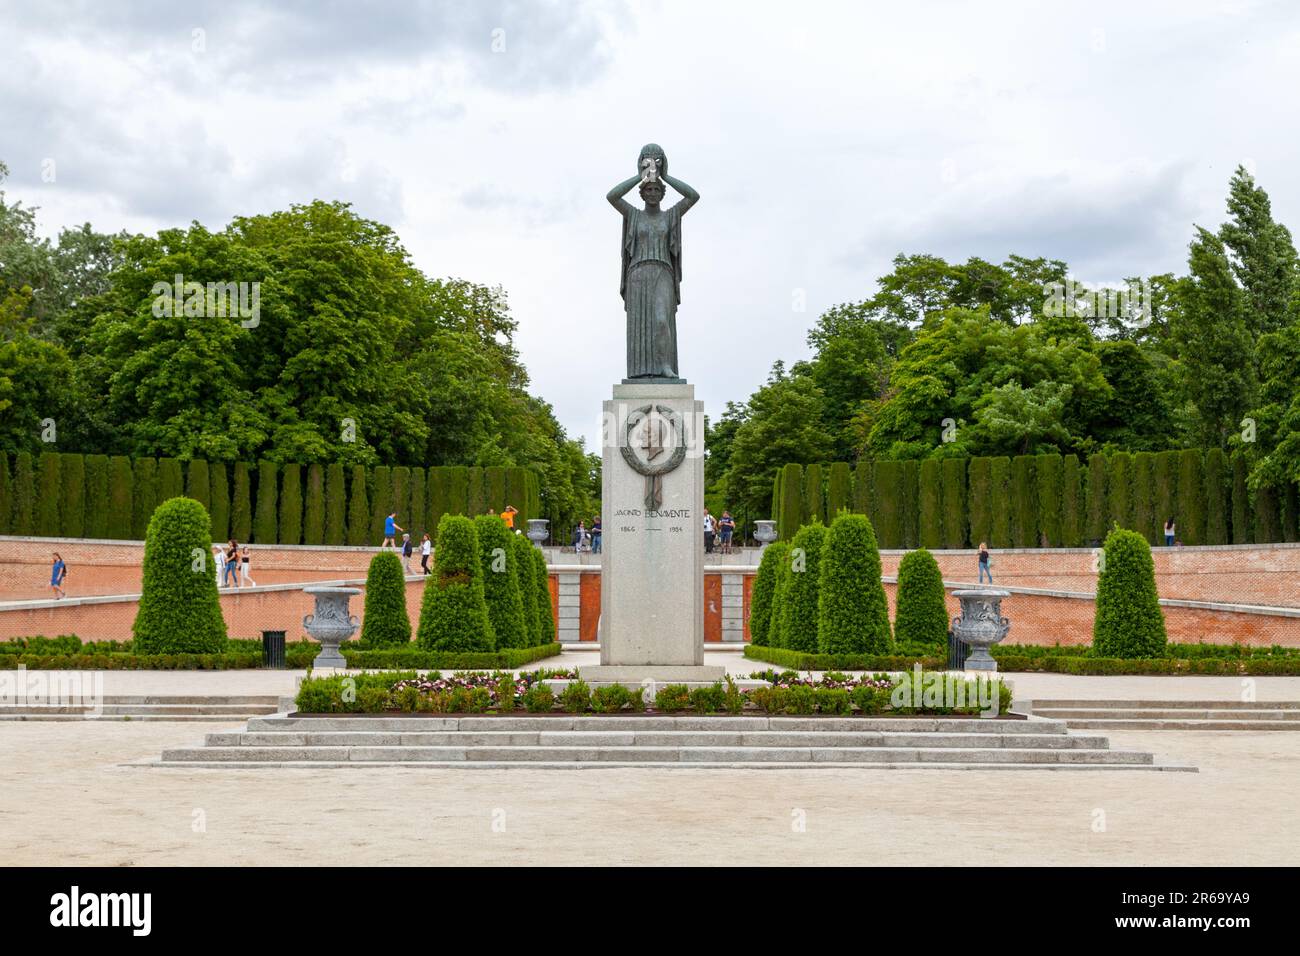 Madrid, Spain - June 07 2018: The Monument to Jacinto Benavente is a monument located in Buen Retiro Park. It is the work of sculptor Victorio Macho. Stock Photo